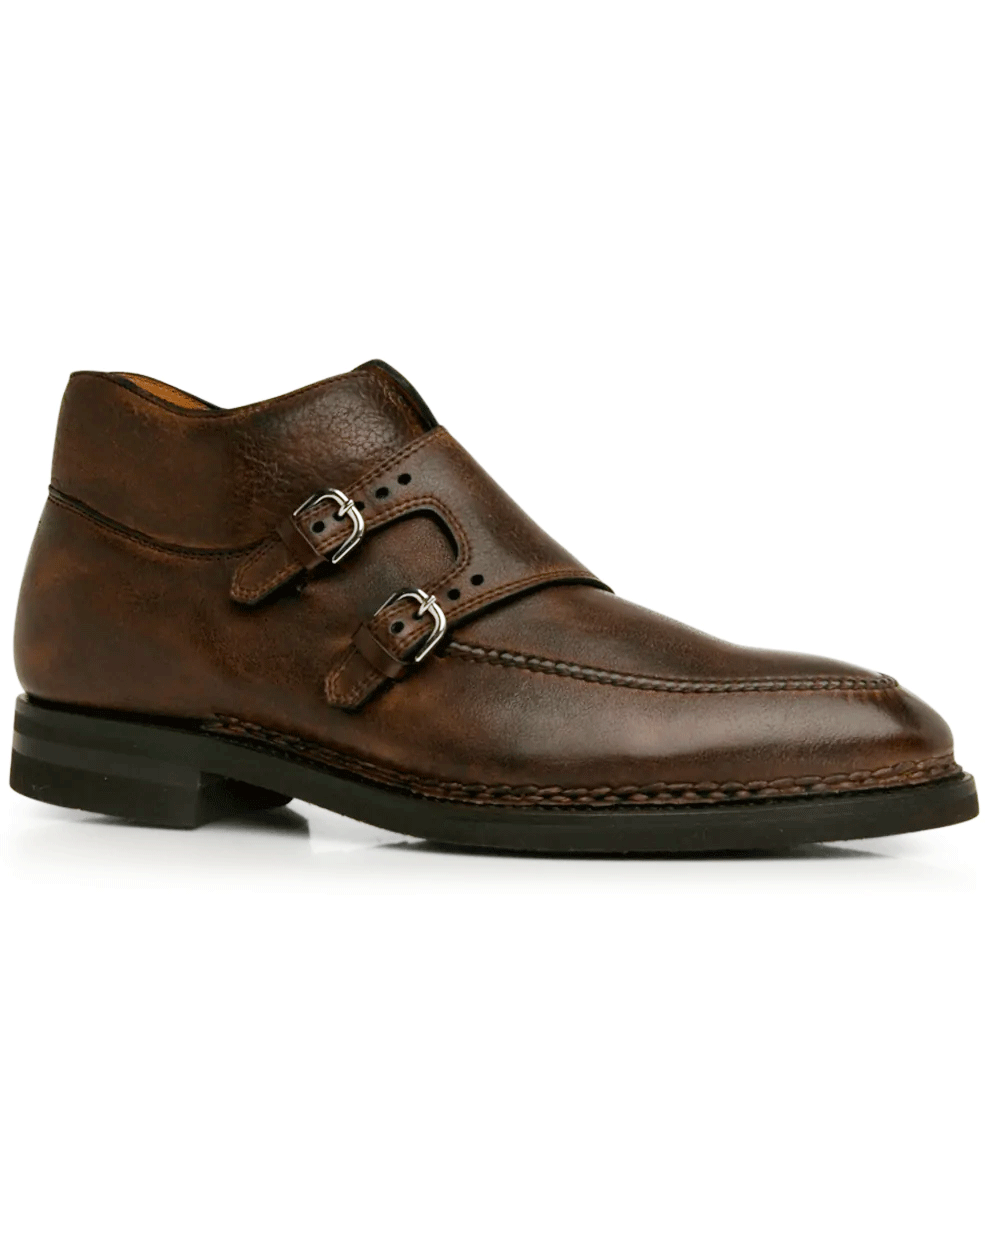 Double Monkstrap Boot in Light Chocolate